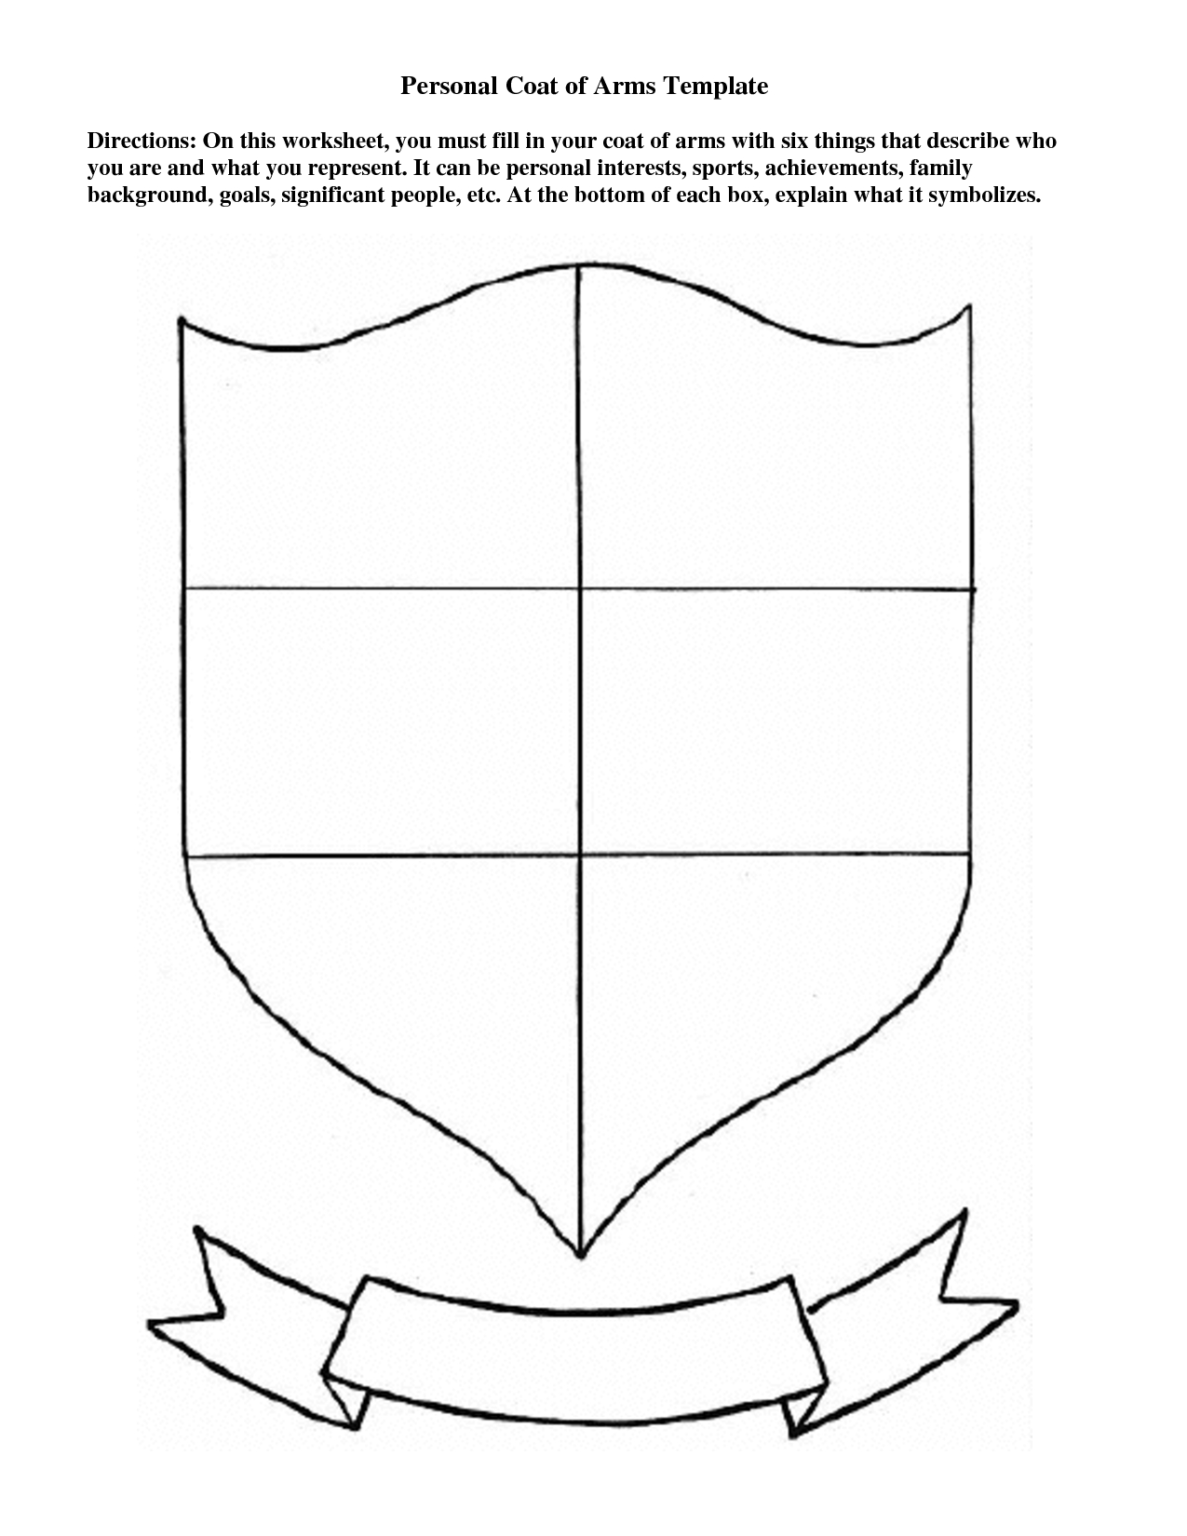 Personal Coat Of Arms Template